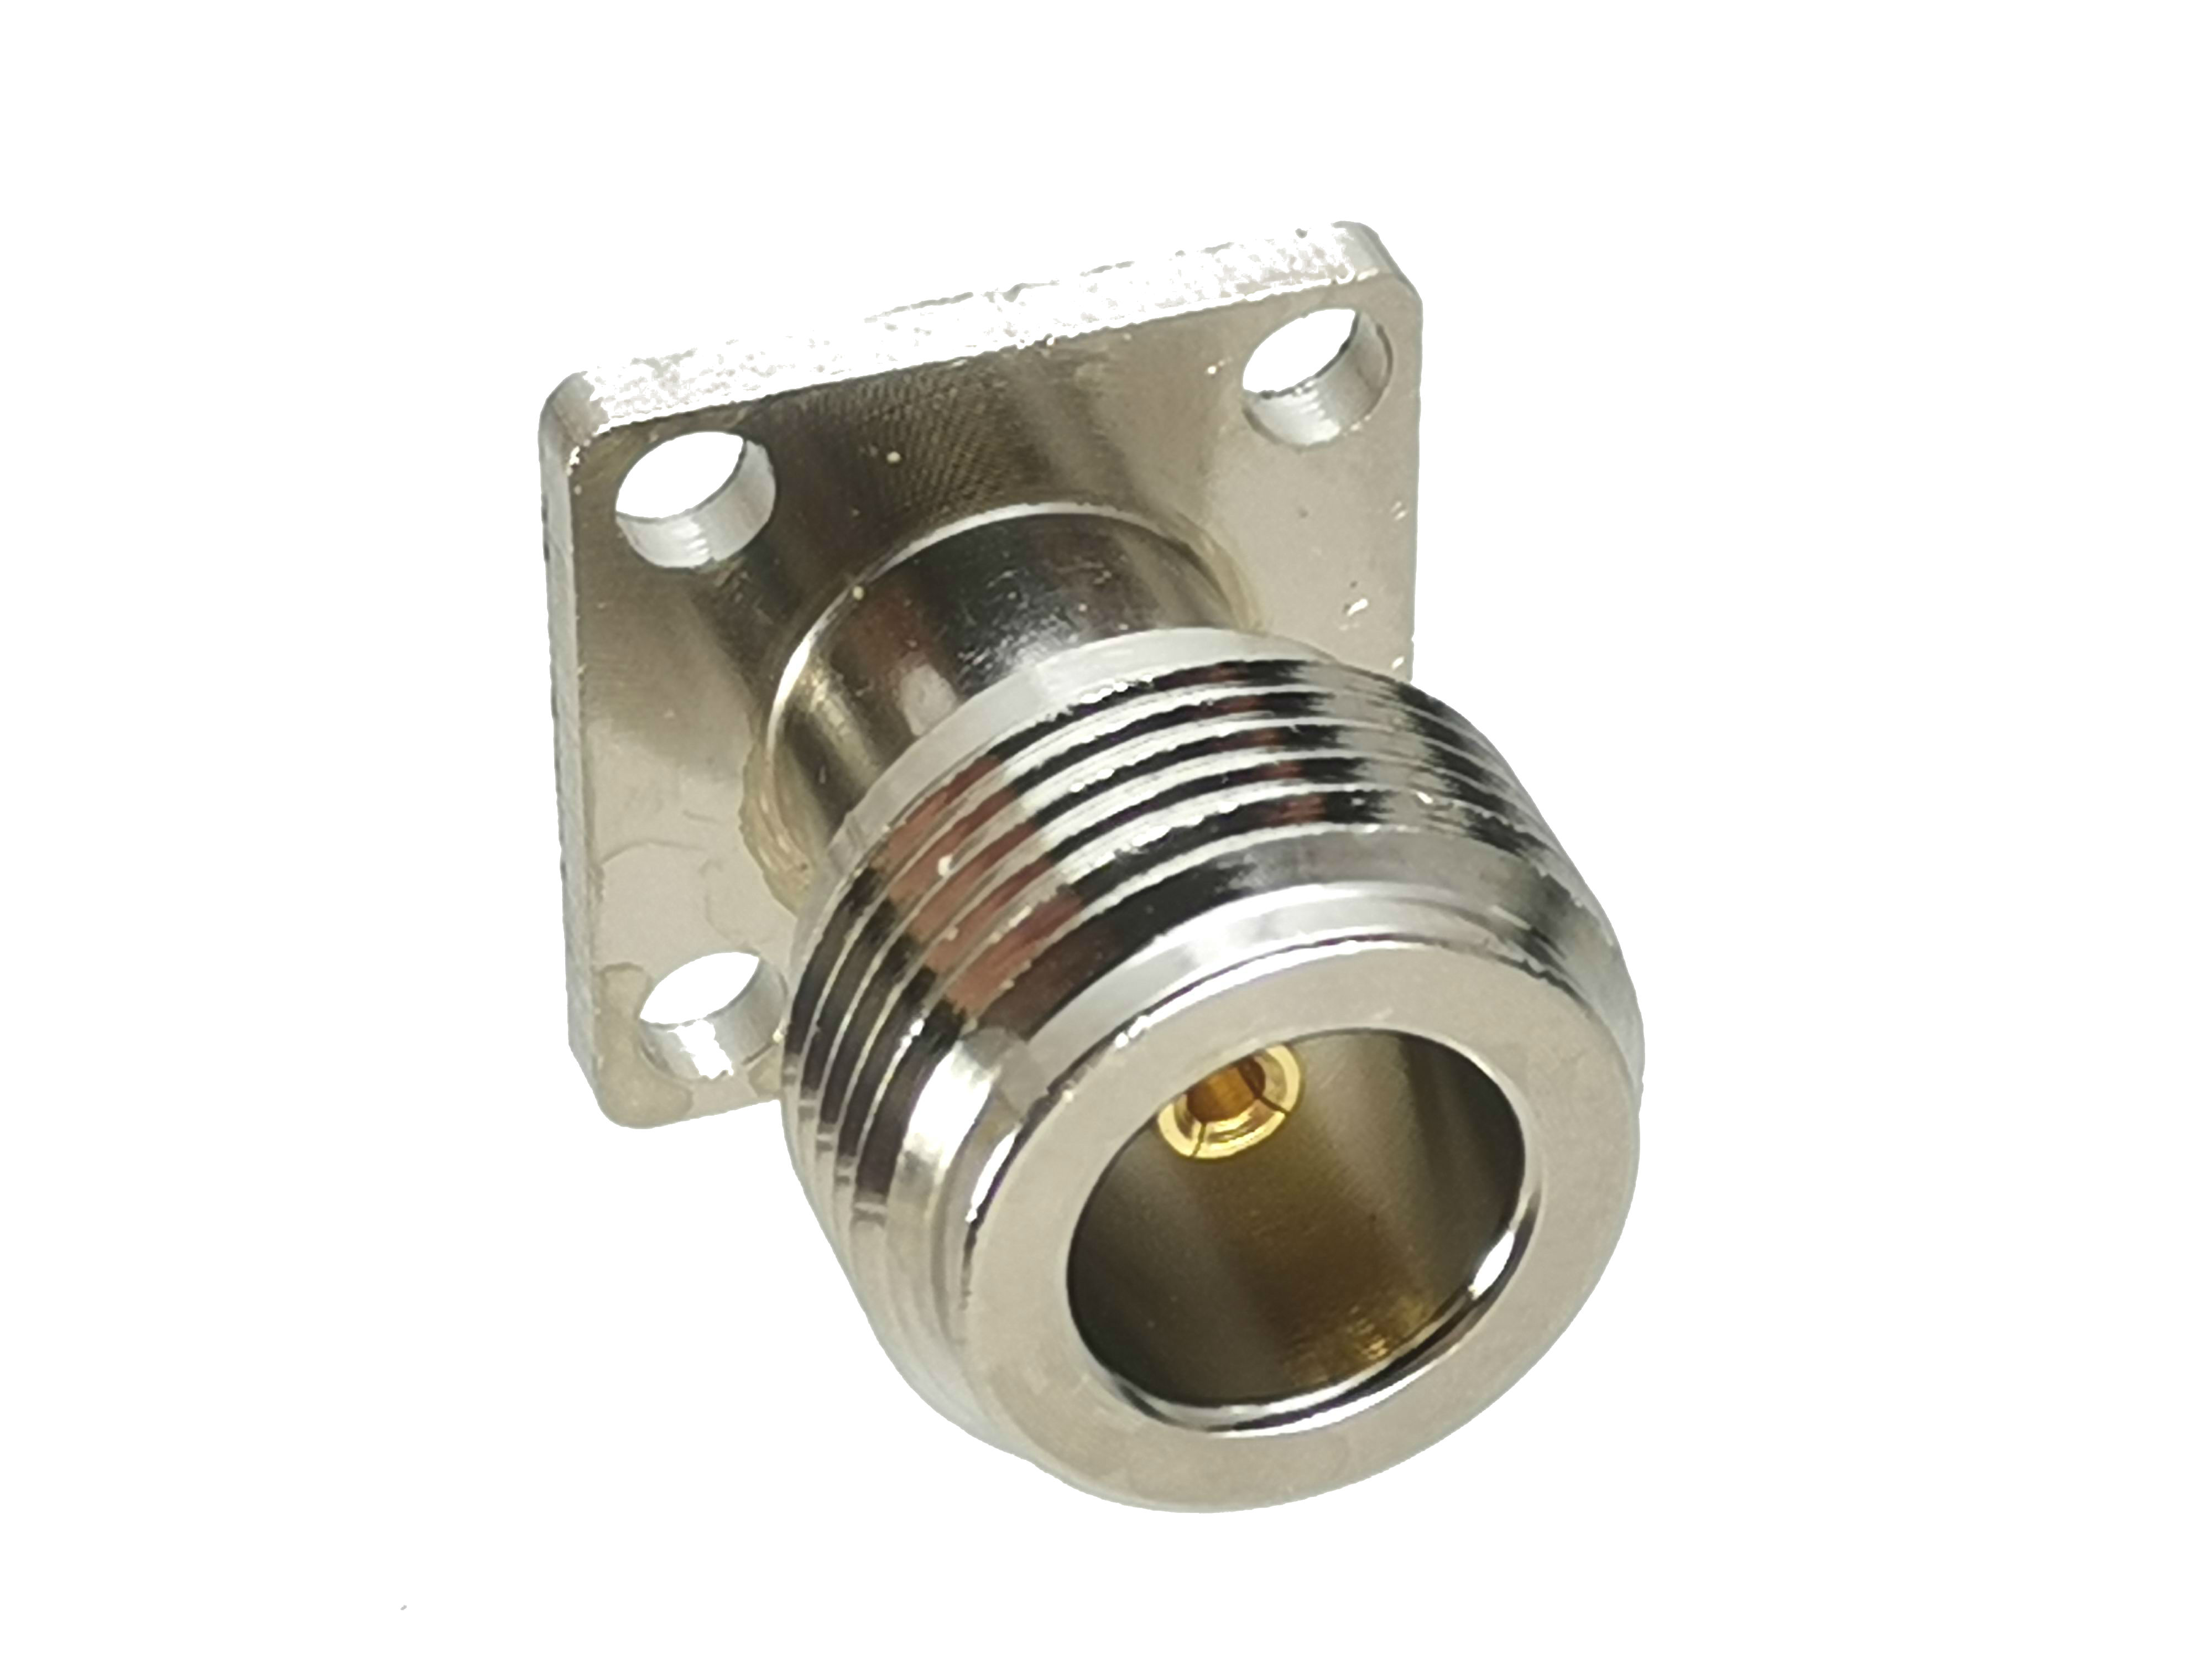 1Pcs N Female Jack 4-holes Flange PTFE Solder Pannel mount RF Adapter Connector Coaxial Straight High Quanlity